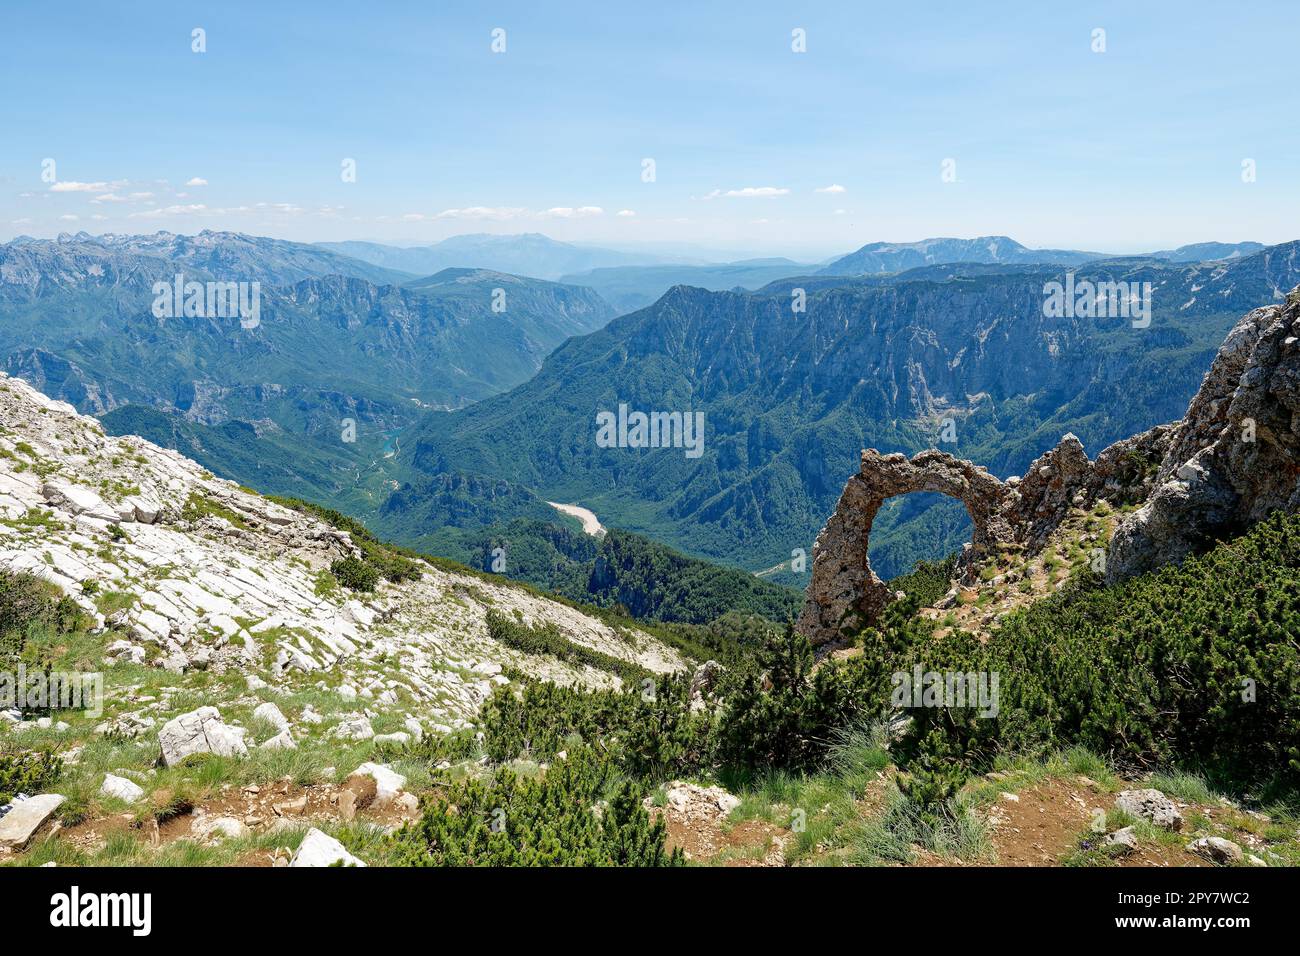 View of circular rock formation in the mountains. Natural monument Hajdučka vrata in Čvrsnica mountain. Famous hiking place in Bosnia and Herzegovina. Stock Photo